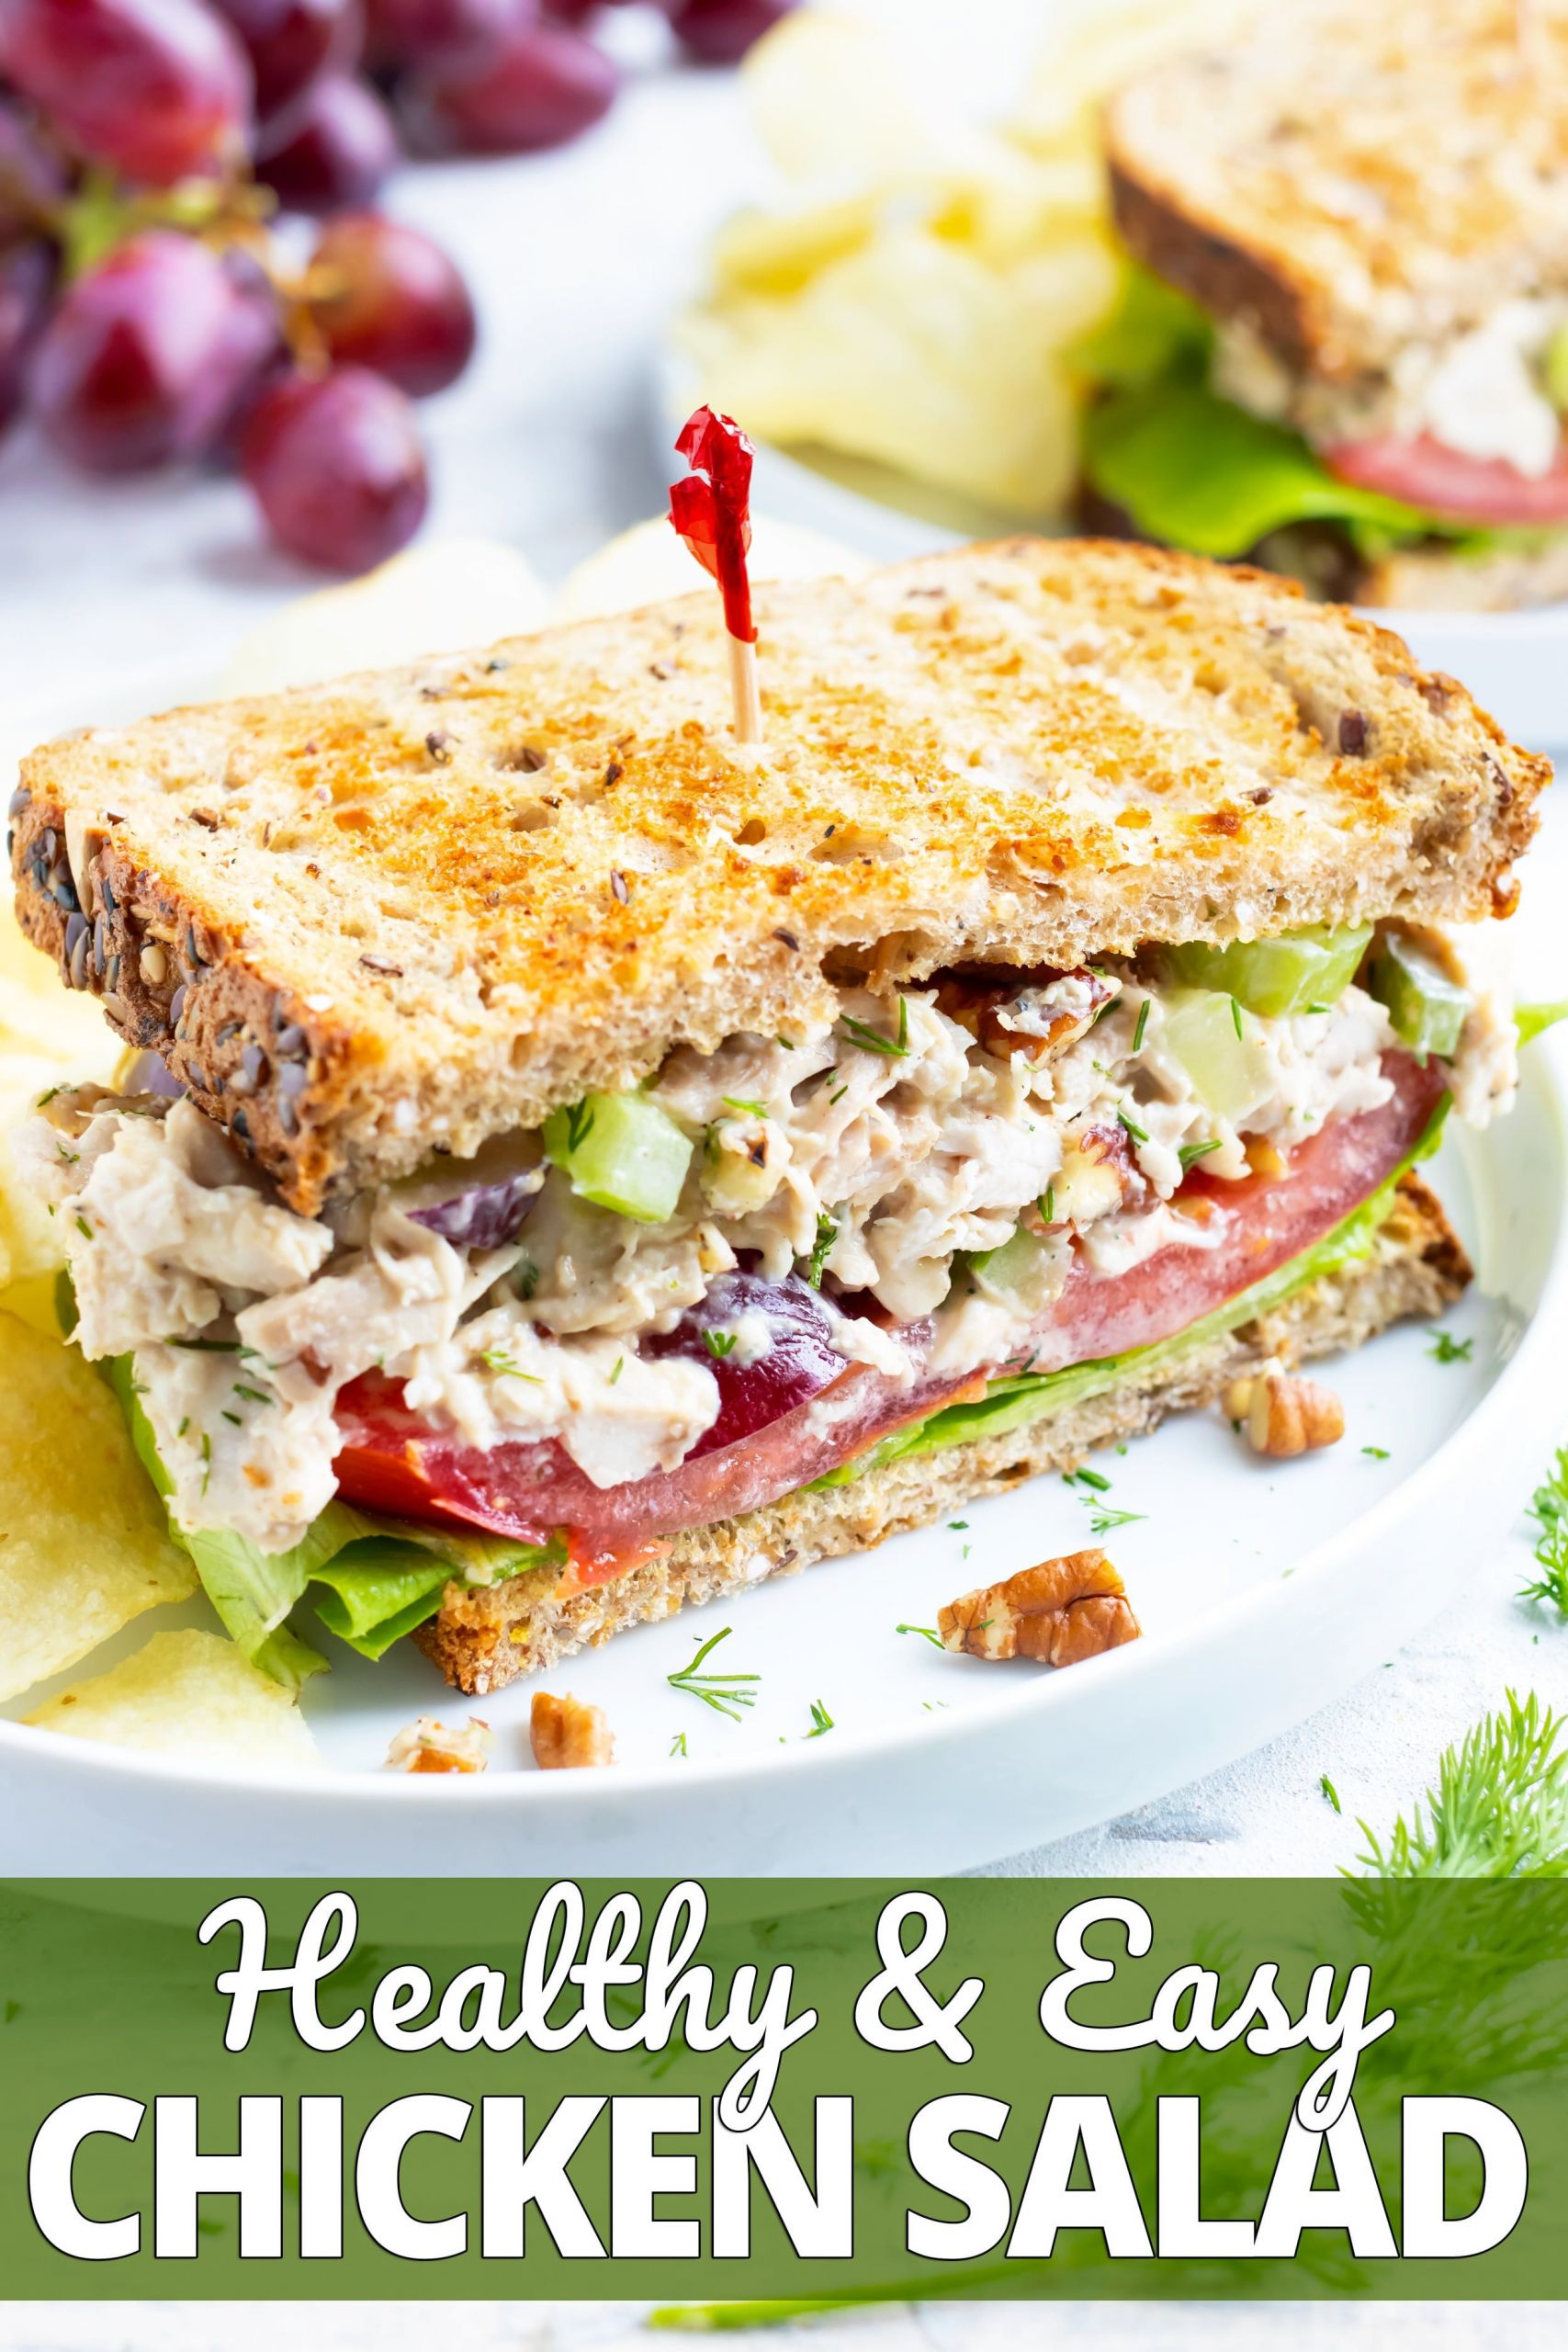 Chicken Salad Sandwich Recipe With Grapes And Pecans
 Chicken Salad with Grapes Recipe